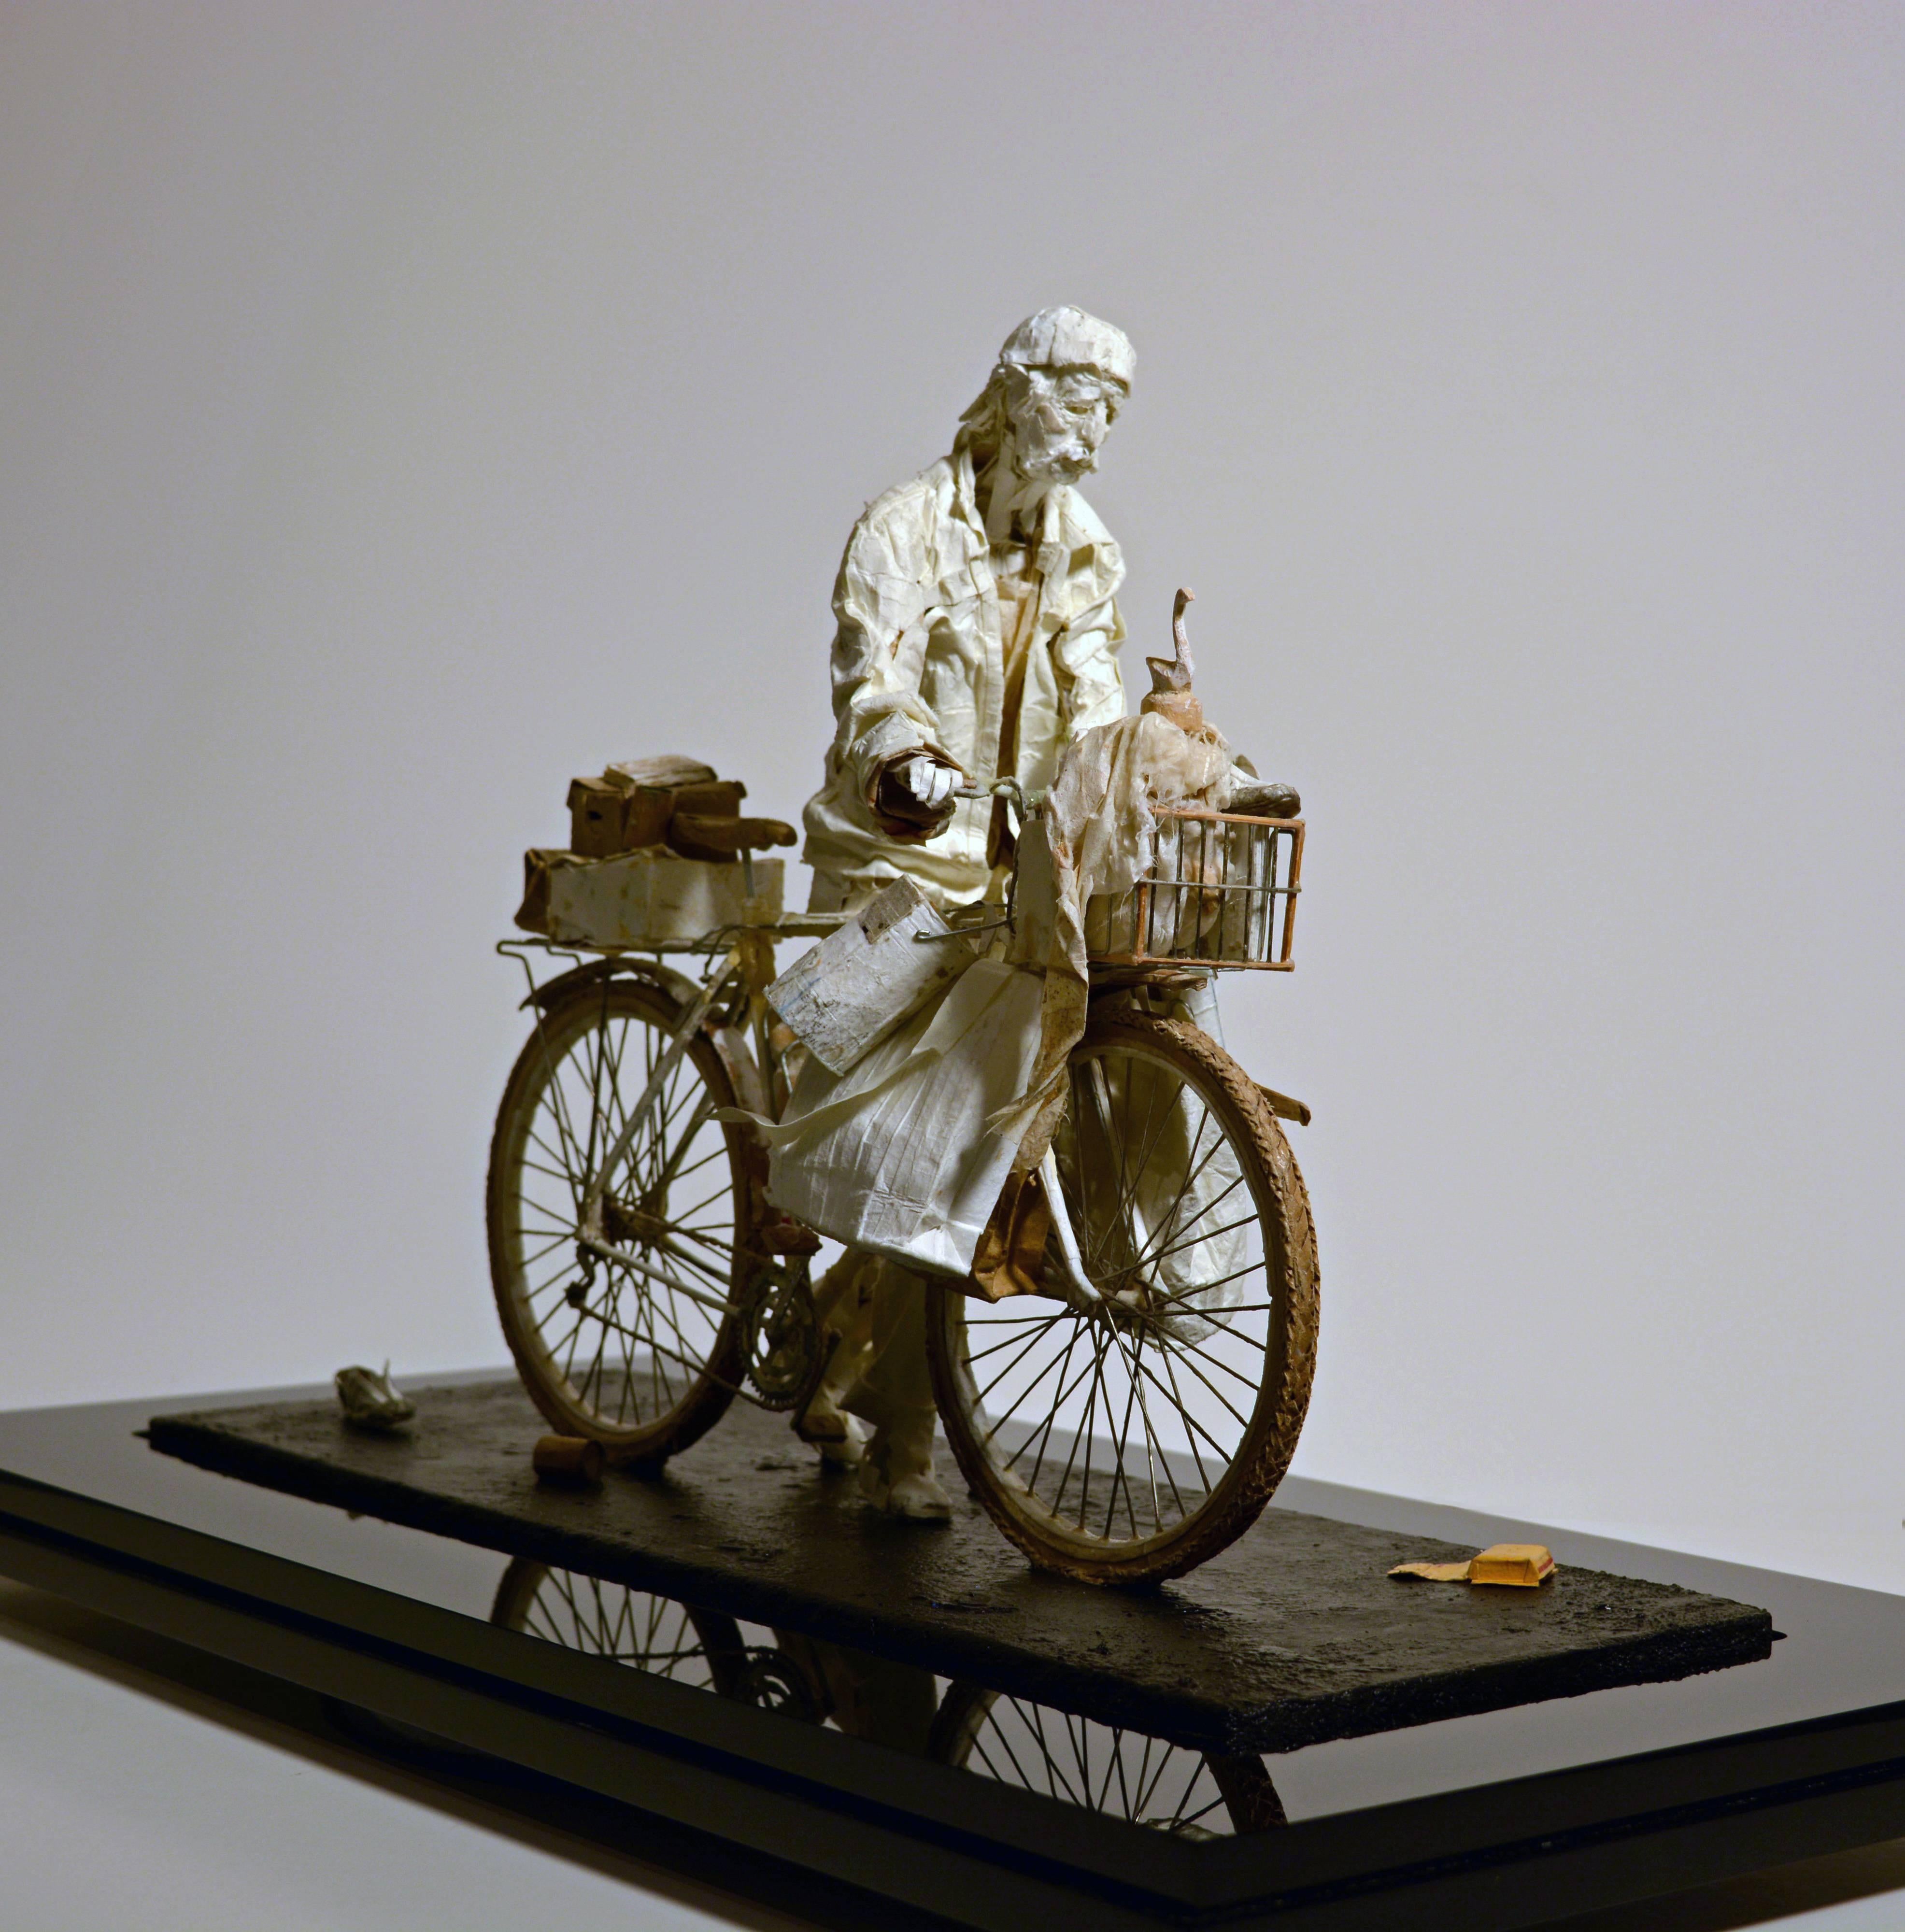 White Swan - Man on Bicycle Sculpture Made of Paper, Glue, Wire, and Wood - Mixed Media Art by Ivan Markovic